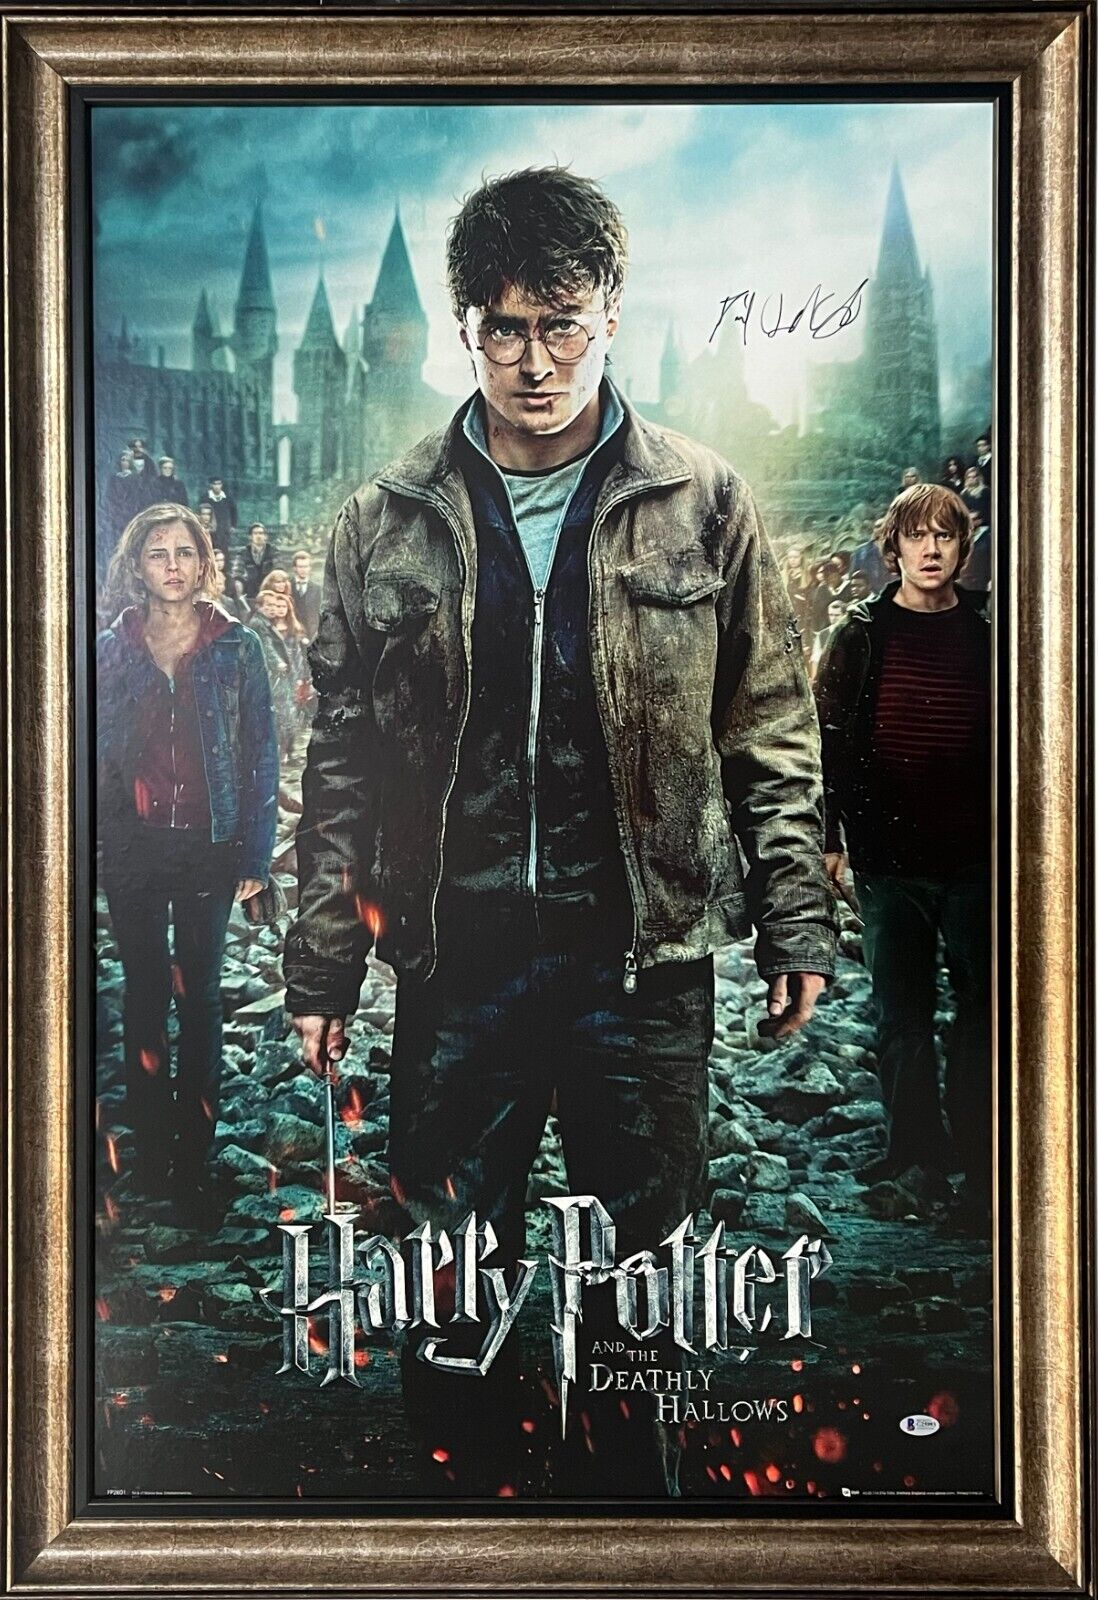 1art1 60266 Poster Collection 91 x 61 cm All The Harry Potter Films